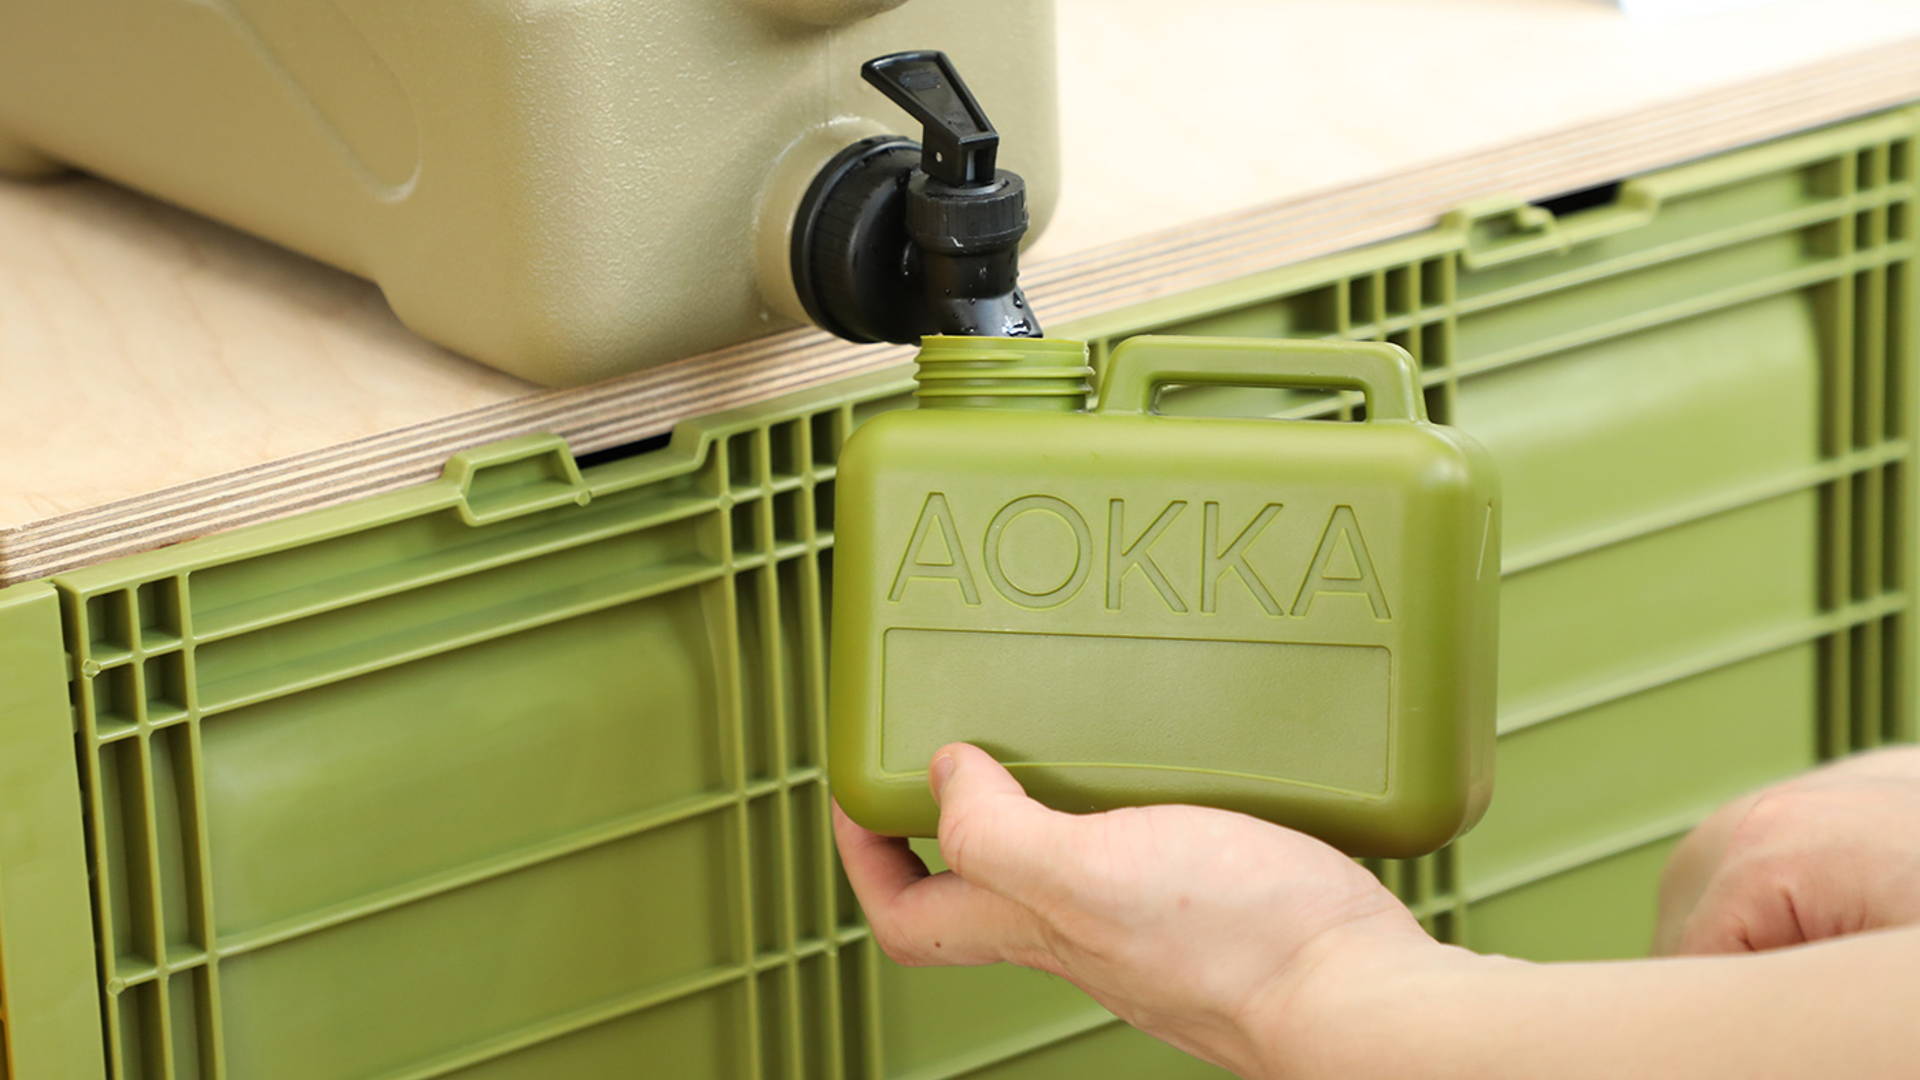 Featured image for Aokka Is A Unique Coffee Brand With A Sense Of Adventure